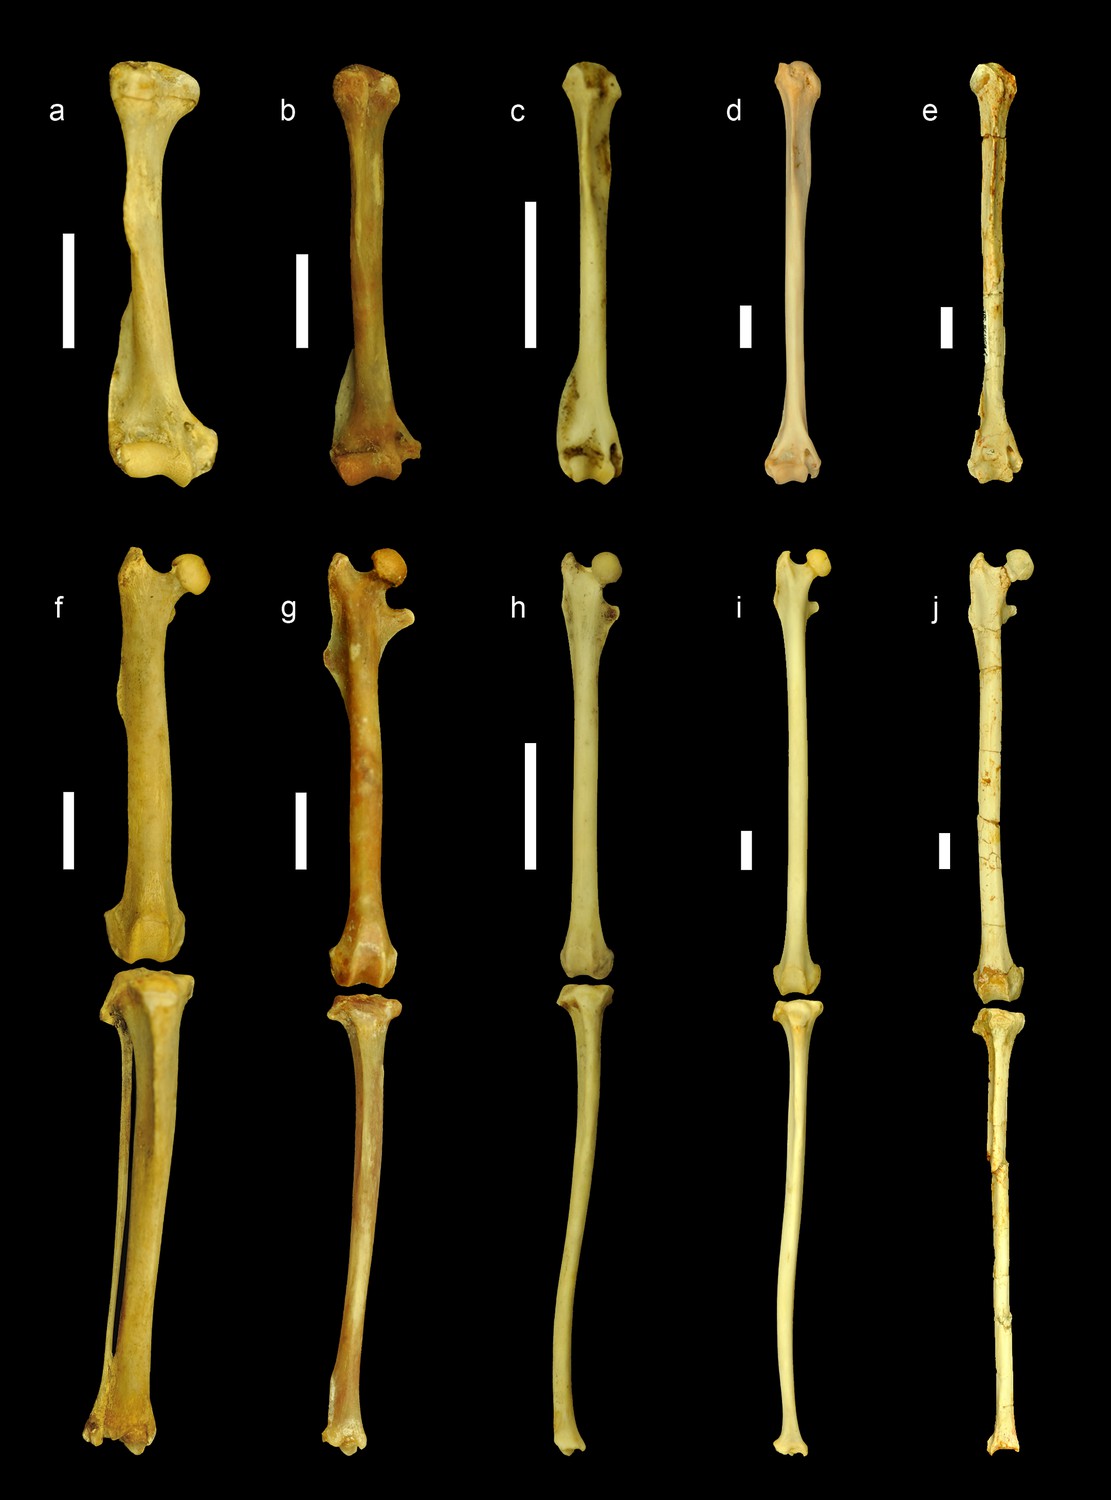 parison of the limb bones of extant ground tree and flying squirrels with Miopetaurista neogrivensis